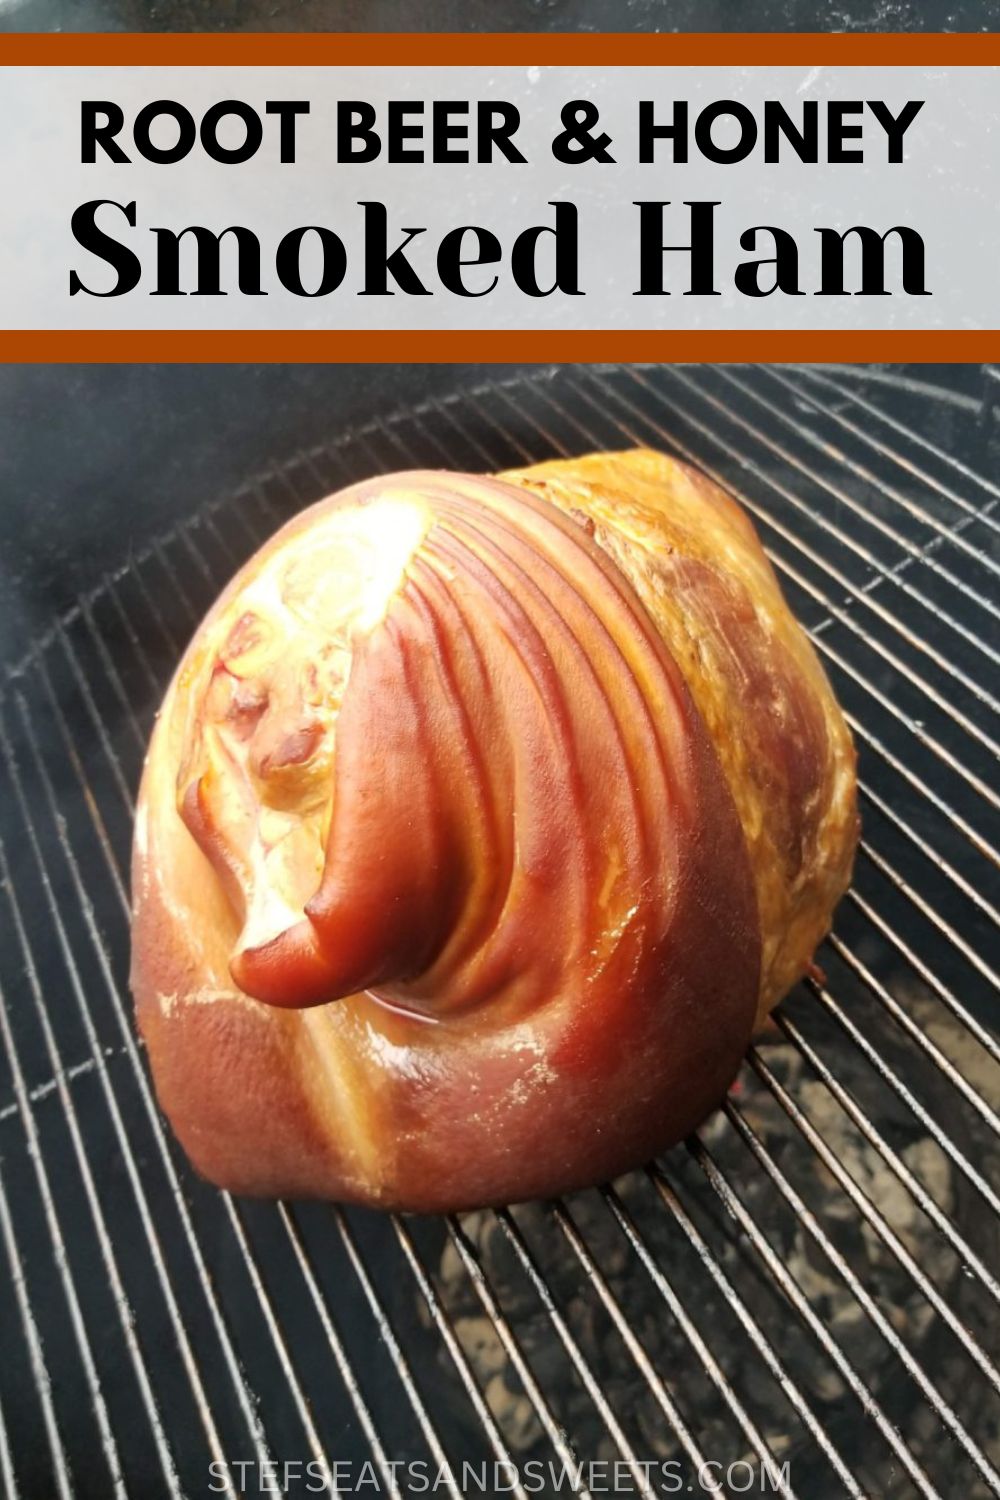 How to smoke a ham with root beer and honey